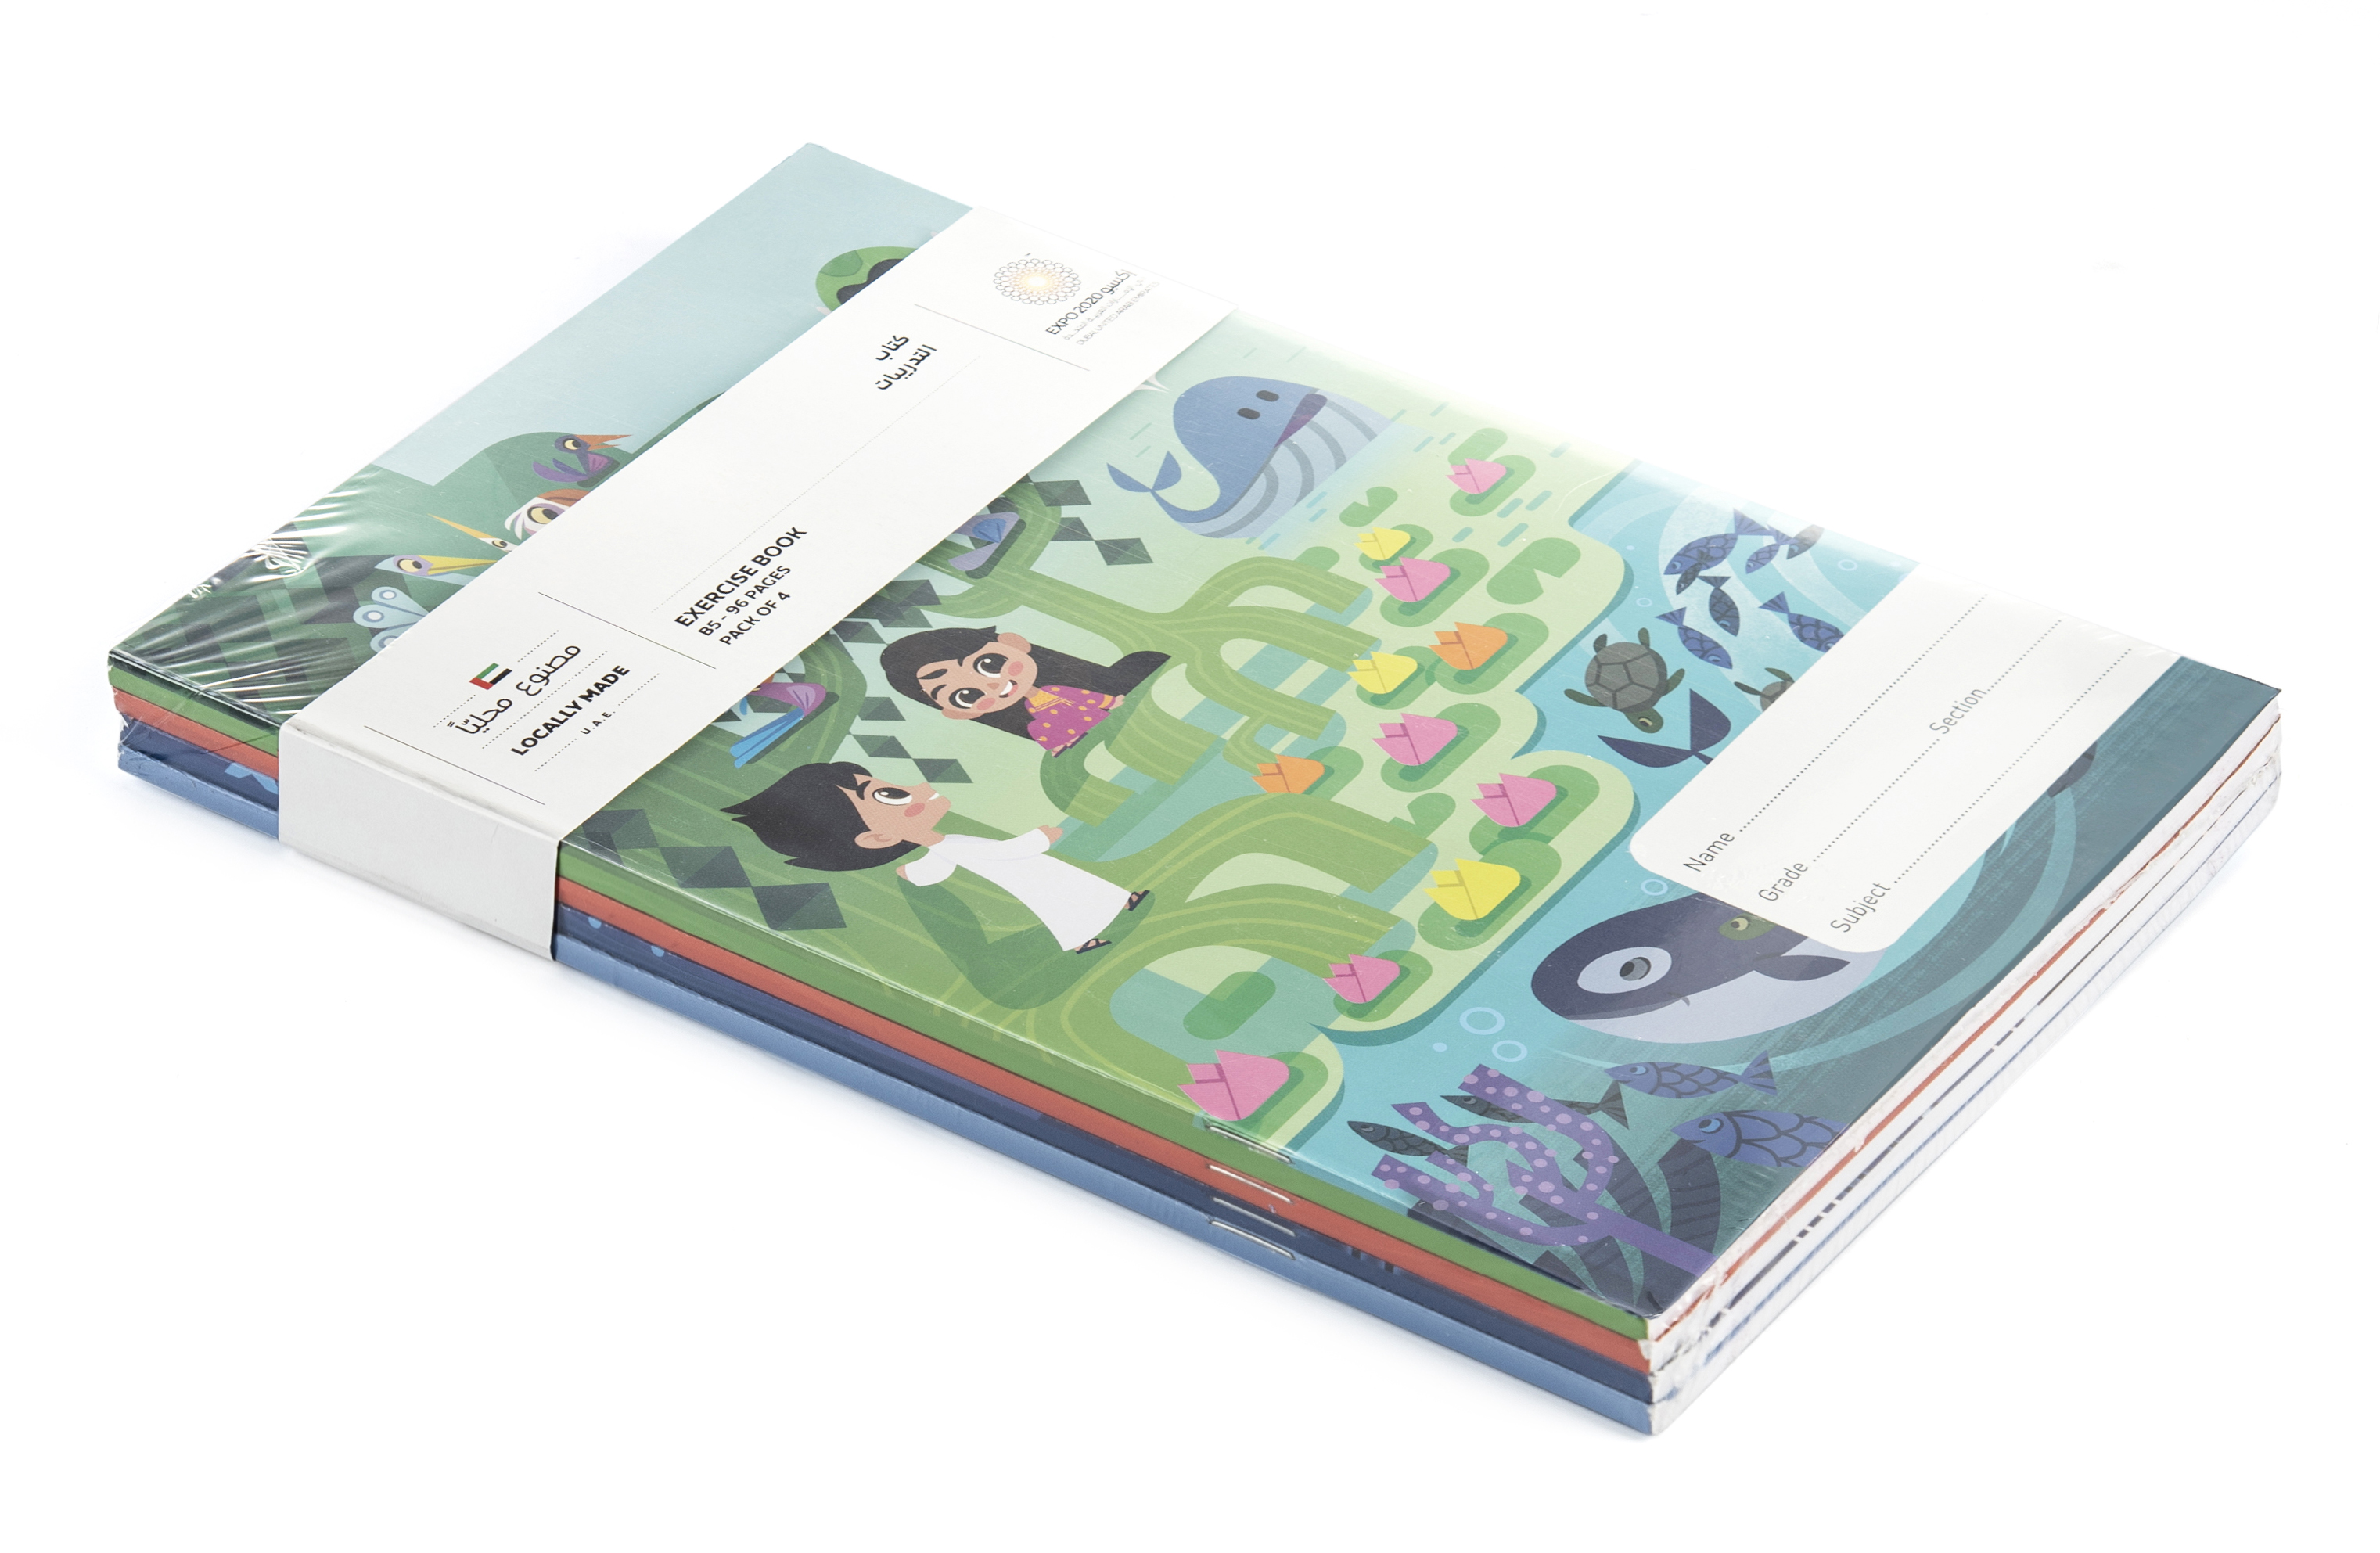 Expo 2020 Dubai Mascots Family B5 Exercise Books Pack of 4 - 96 Pages